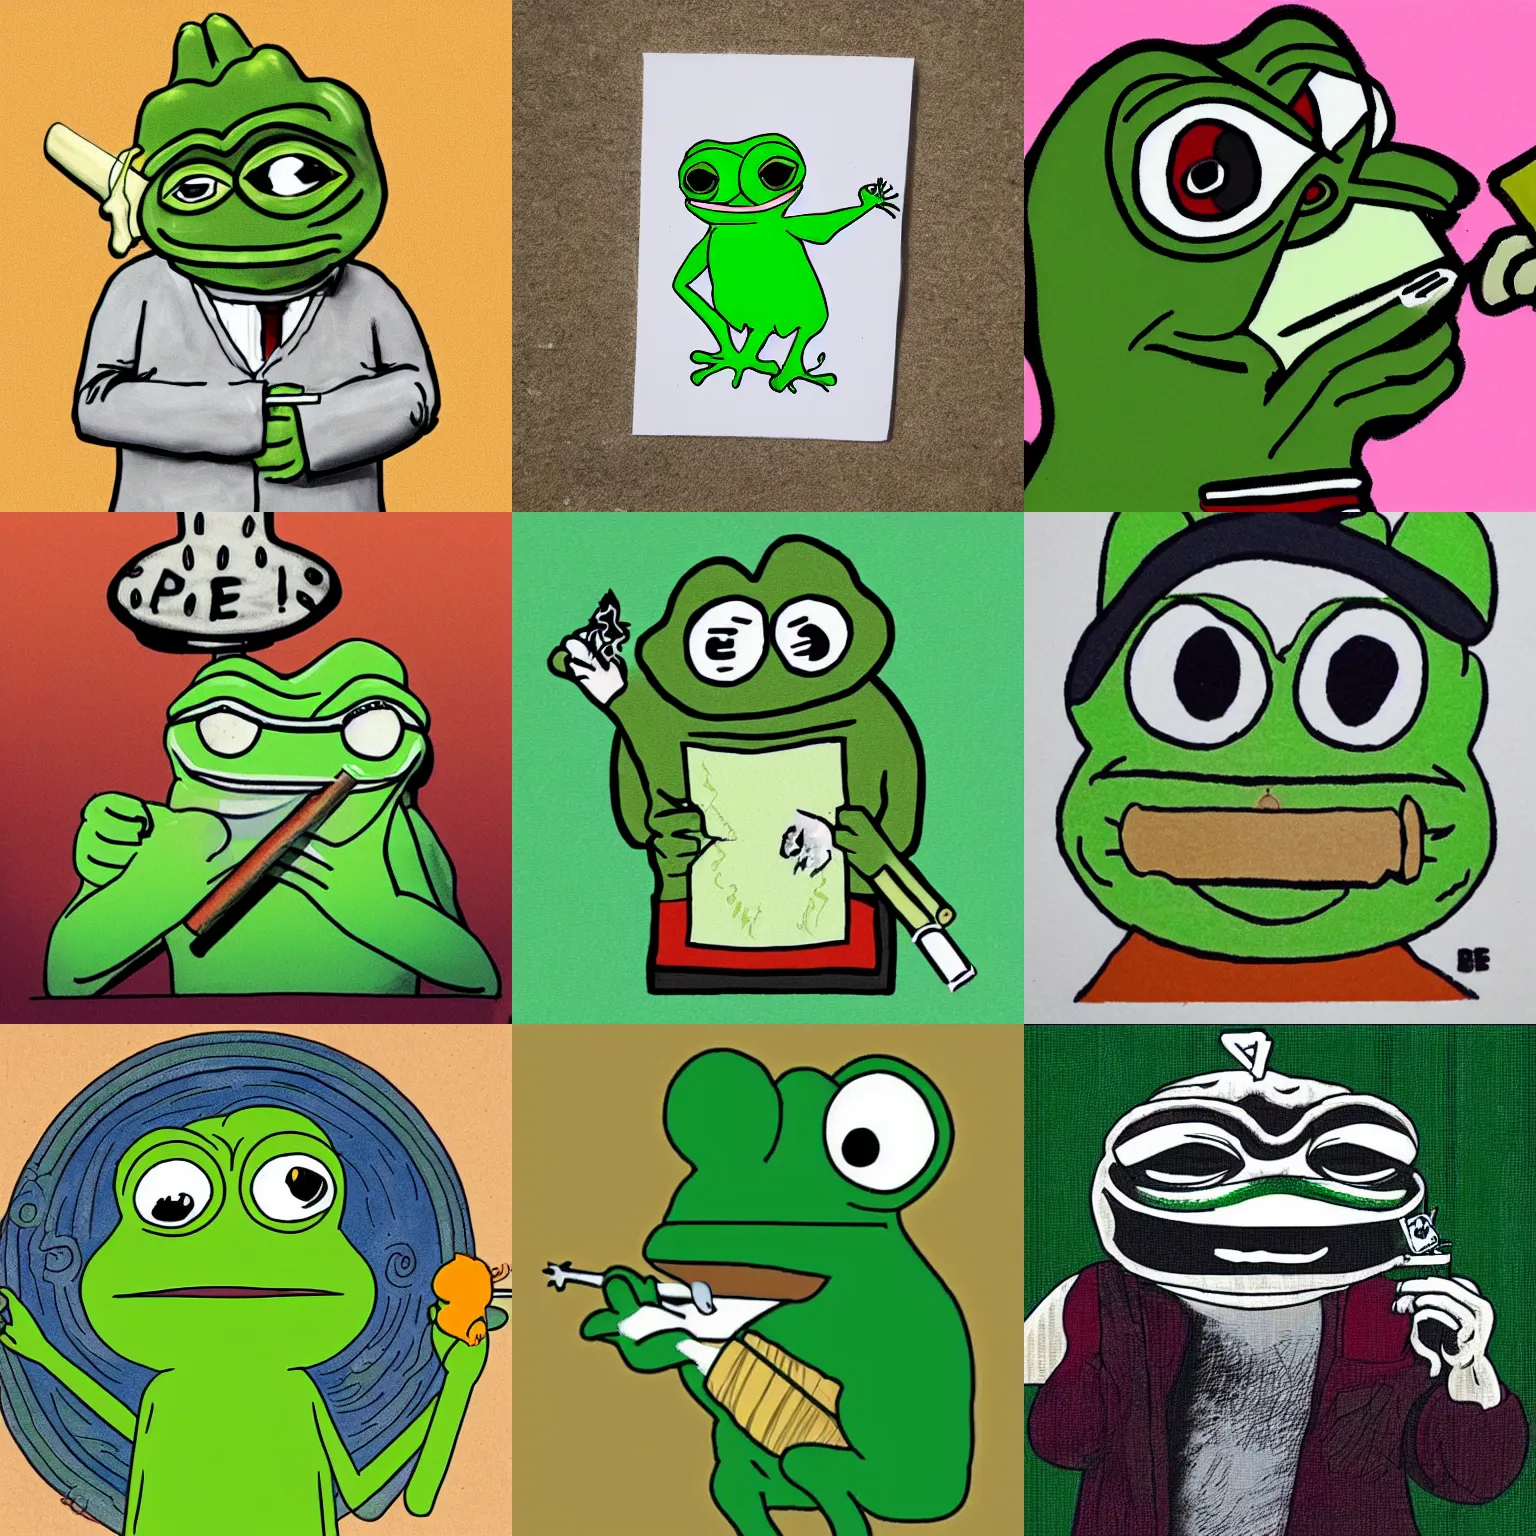 Pepe the frog smoking a joint | Stable Diffusion | OpenArt